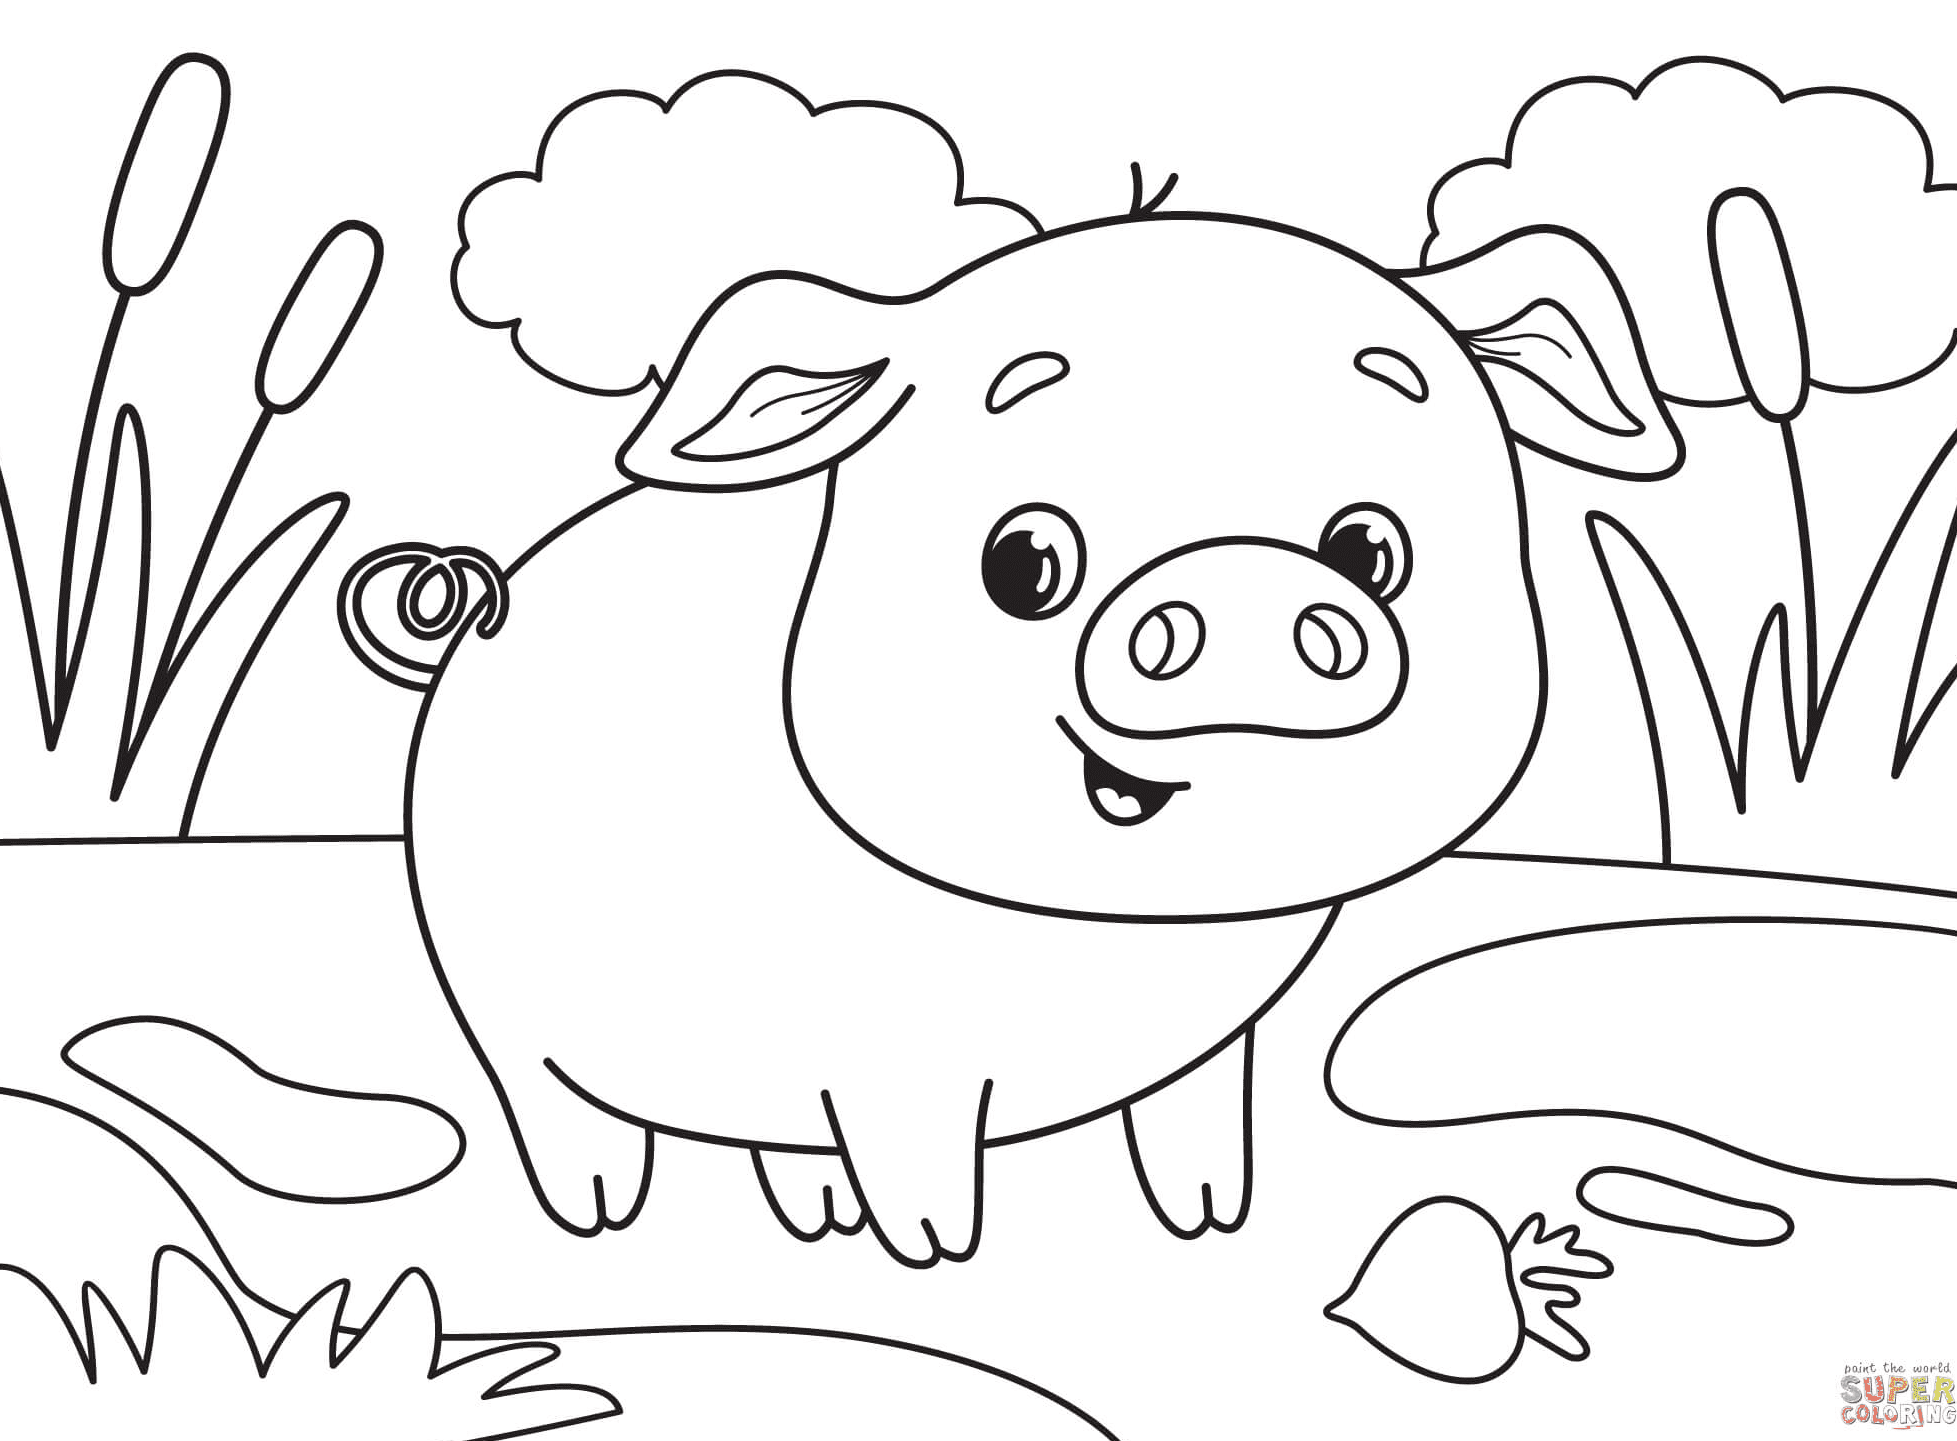 Adorable Pig Coloring Page